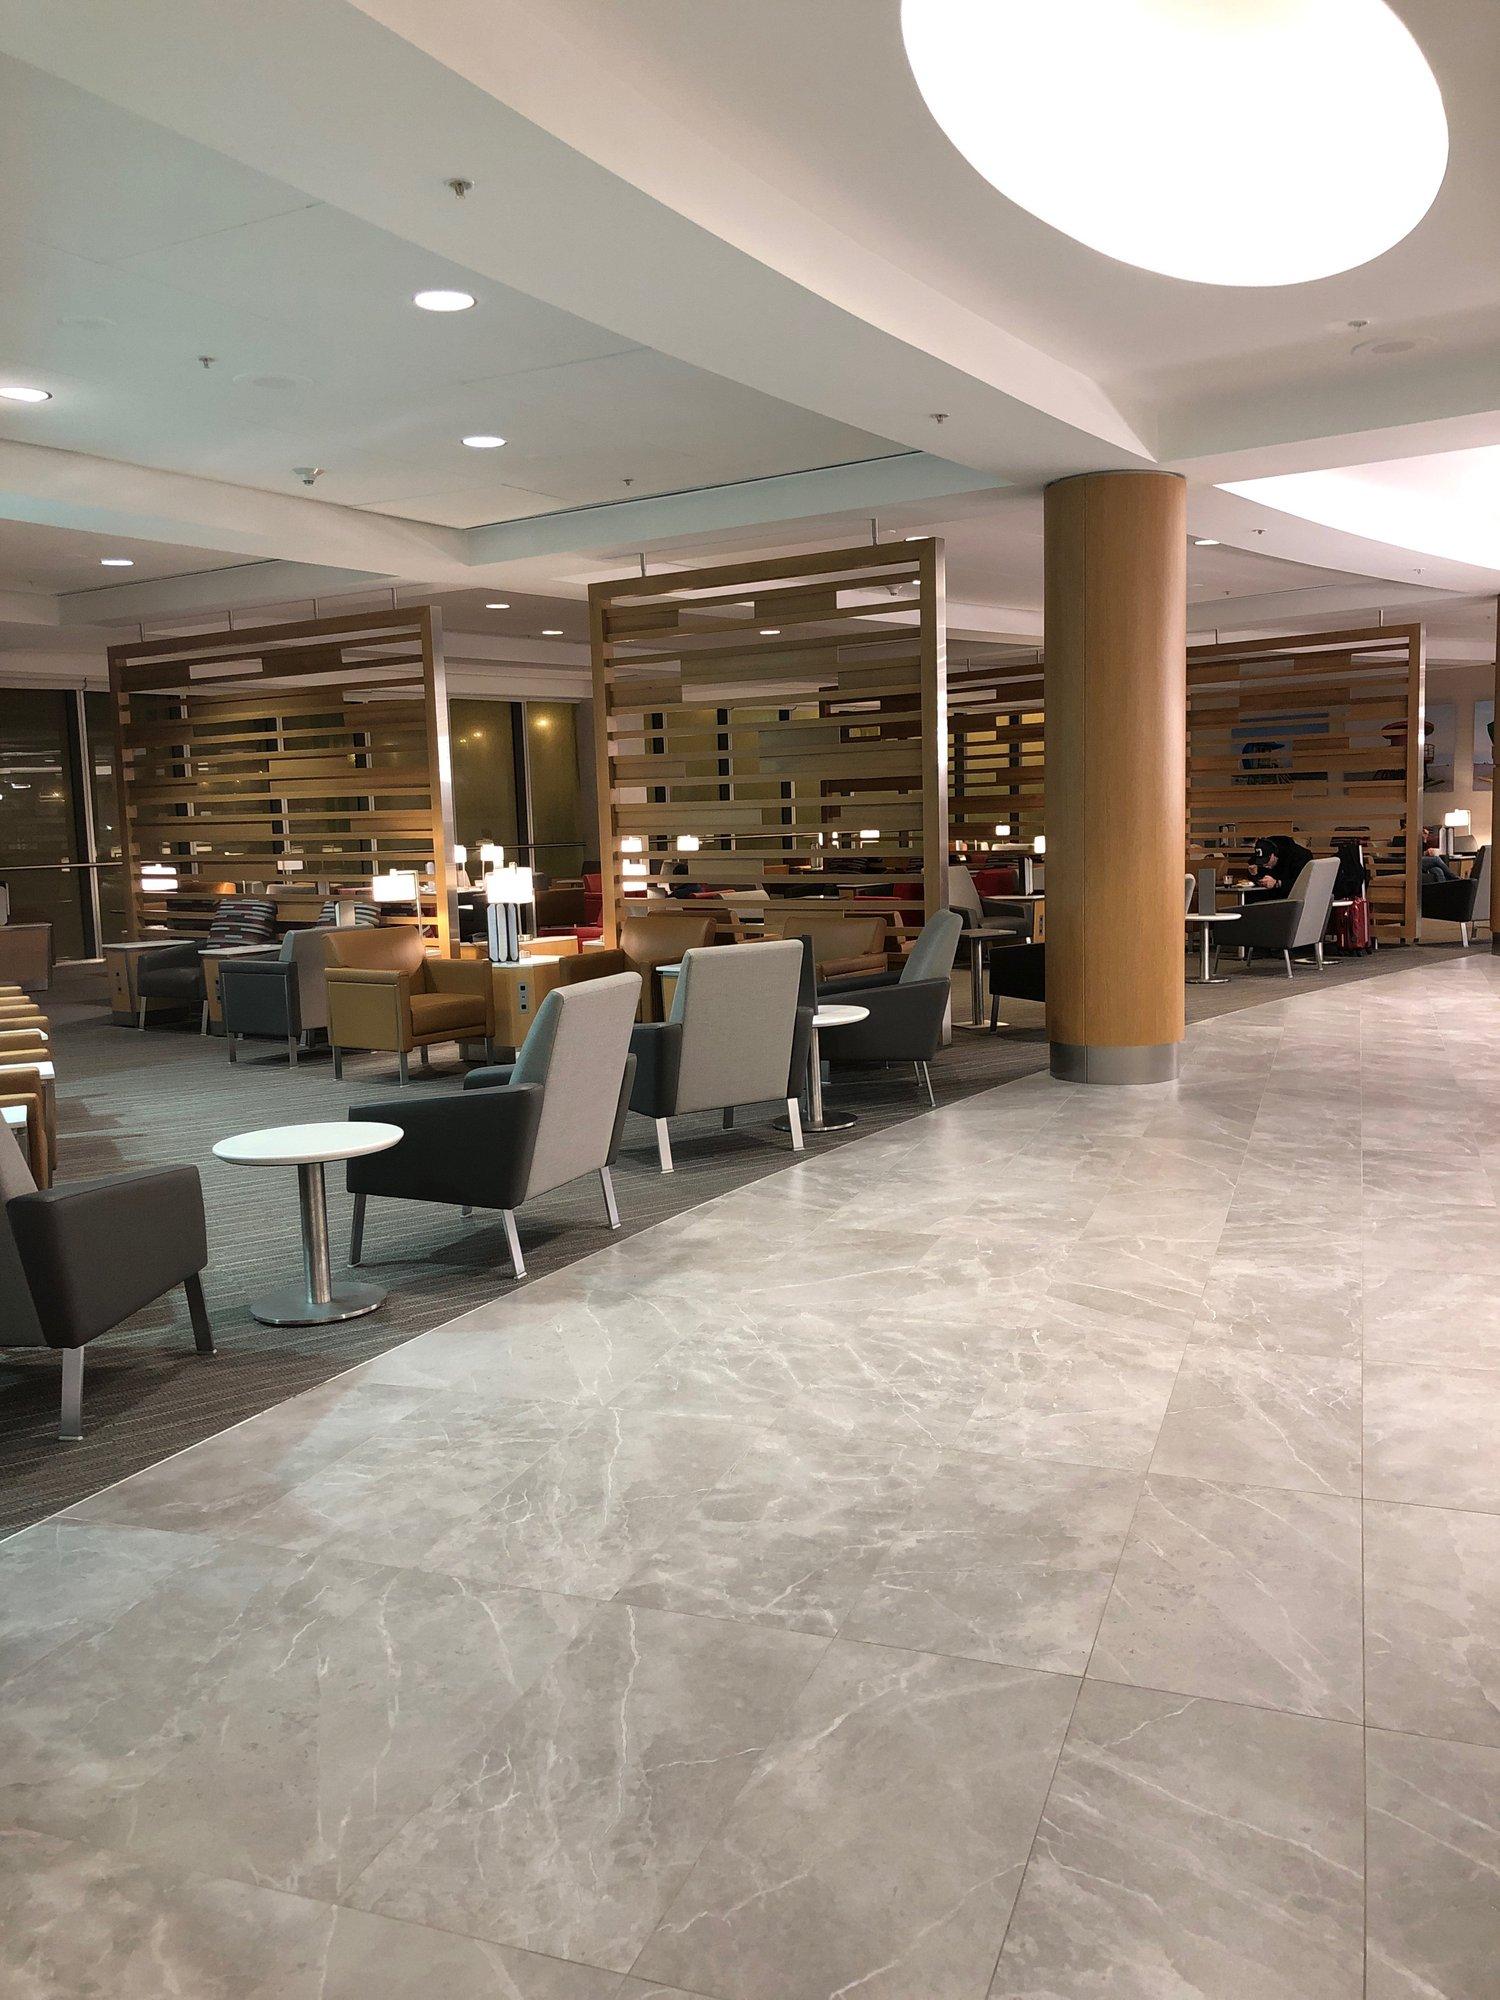 American Airlines Admirals Club (Gate D30) image 4 of 7